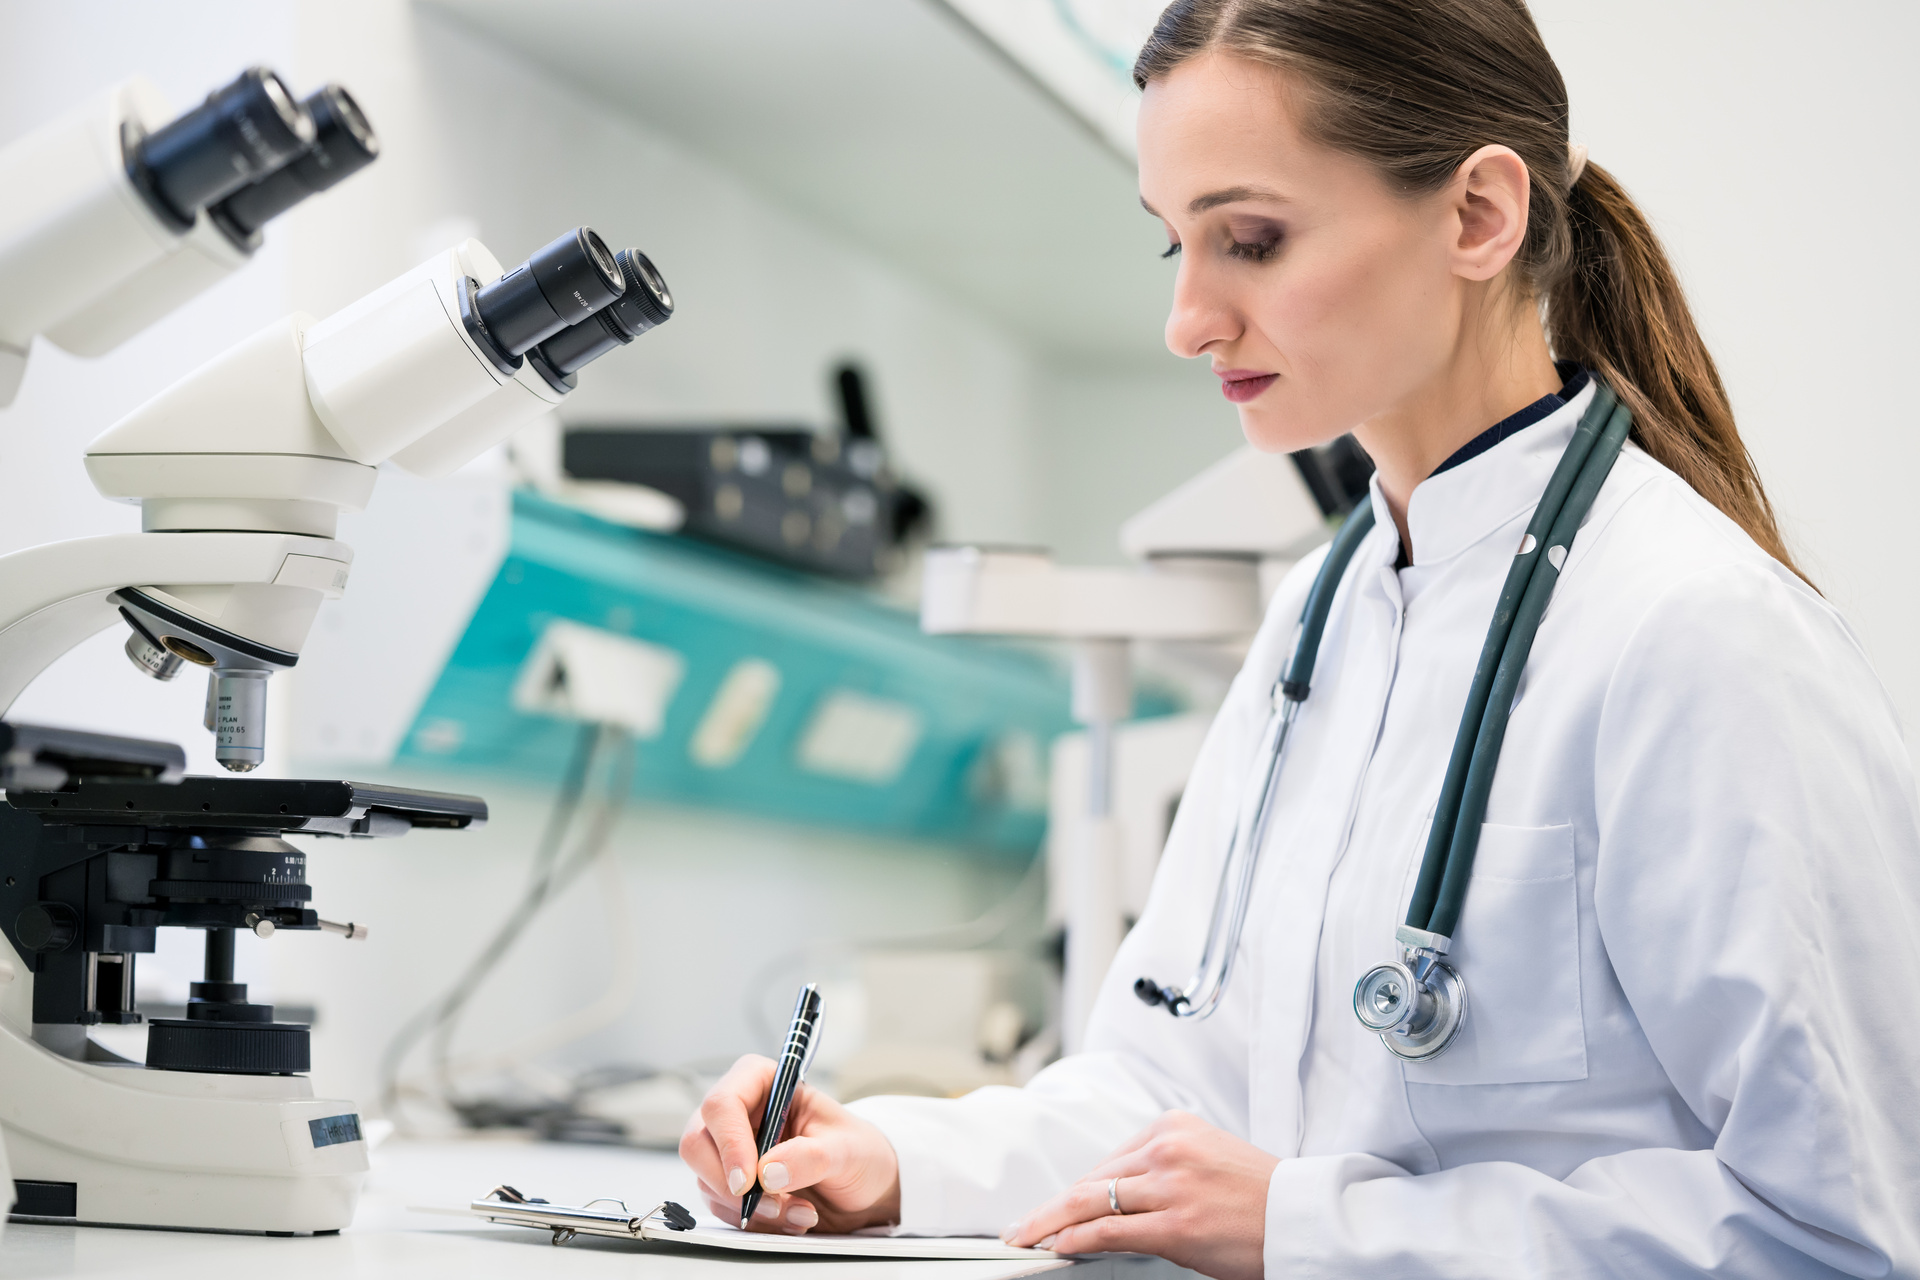 Lab worker collecting data at microscope